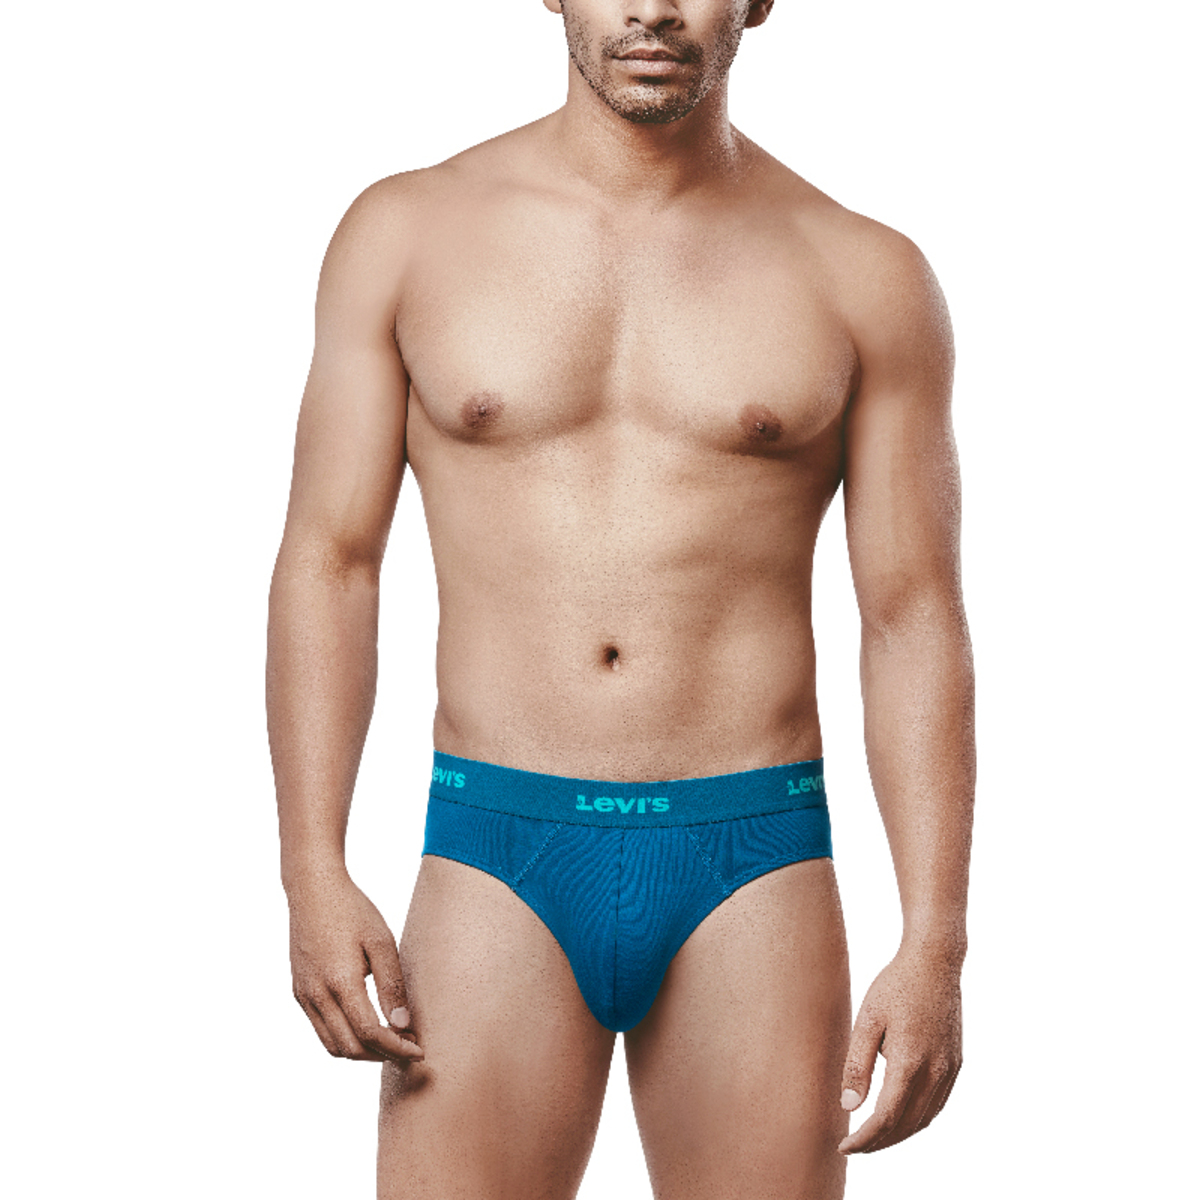 Buy Levis Mens Classic Brief 002 Teal Small Online - Lulu Hypermarket India